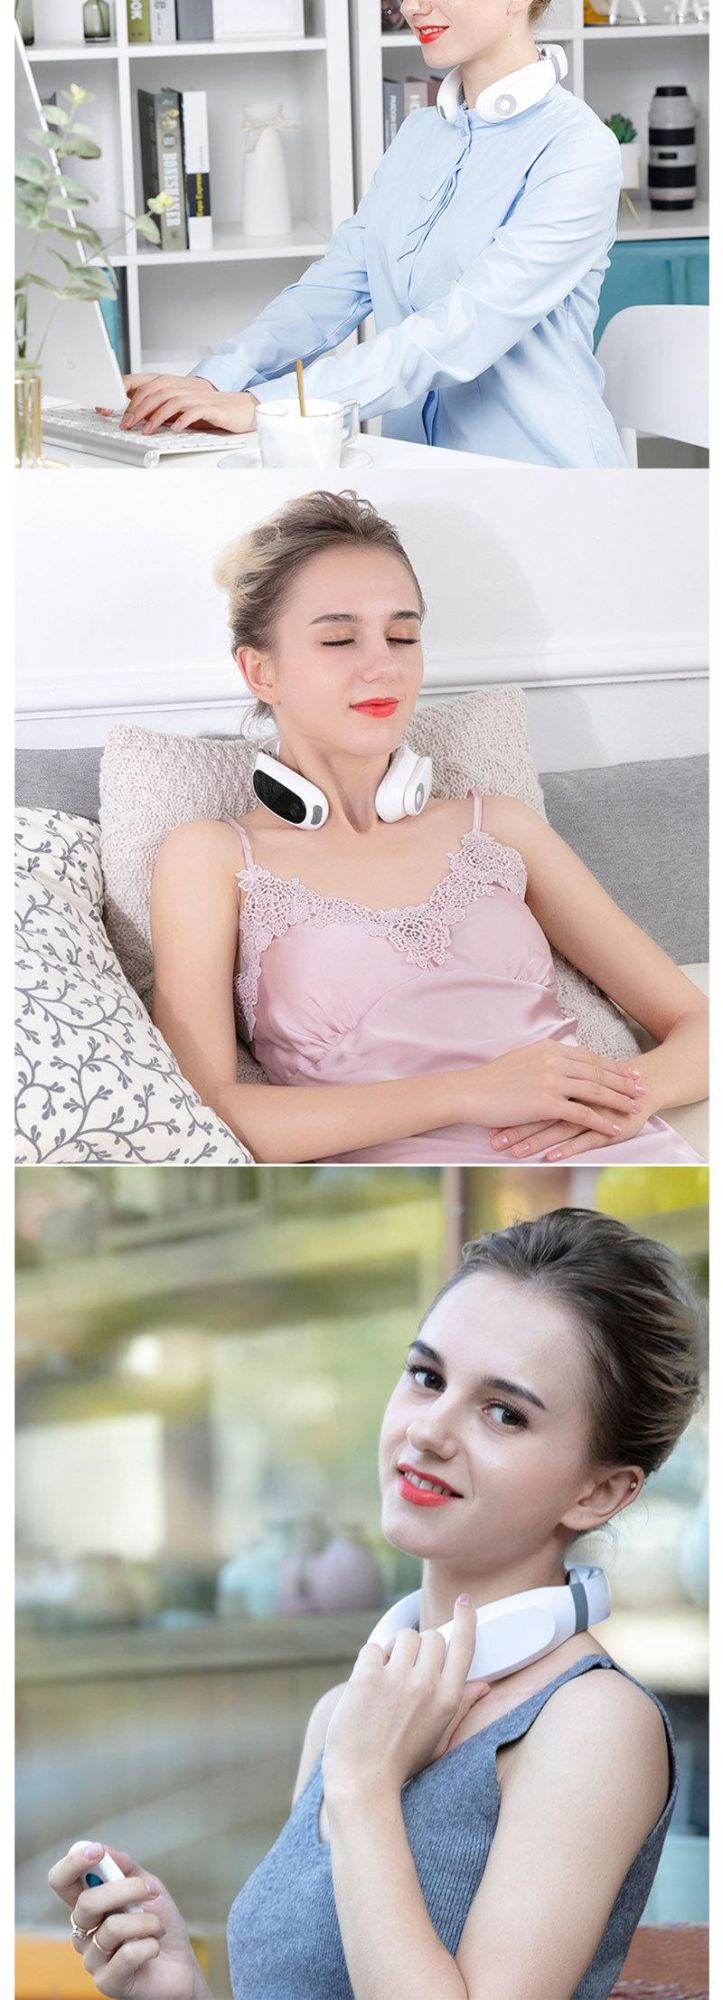 Dropshipping Electric Far Infrared Heating Pain Relief Mini Neck Massager for Neck Health Care Physical Therapy Massage Machine